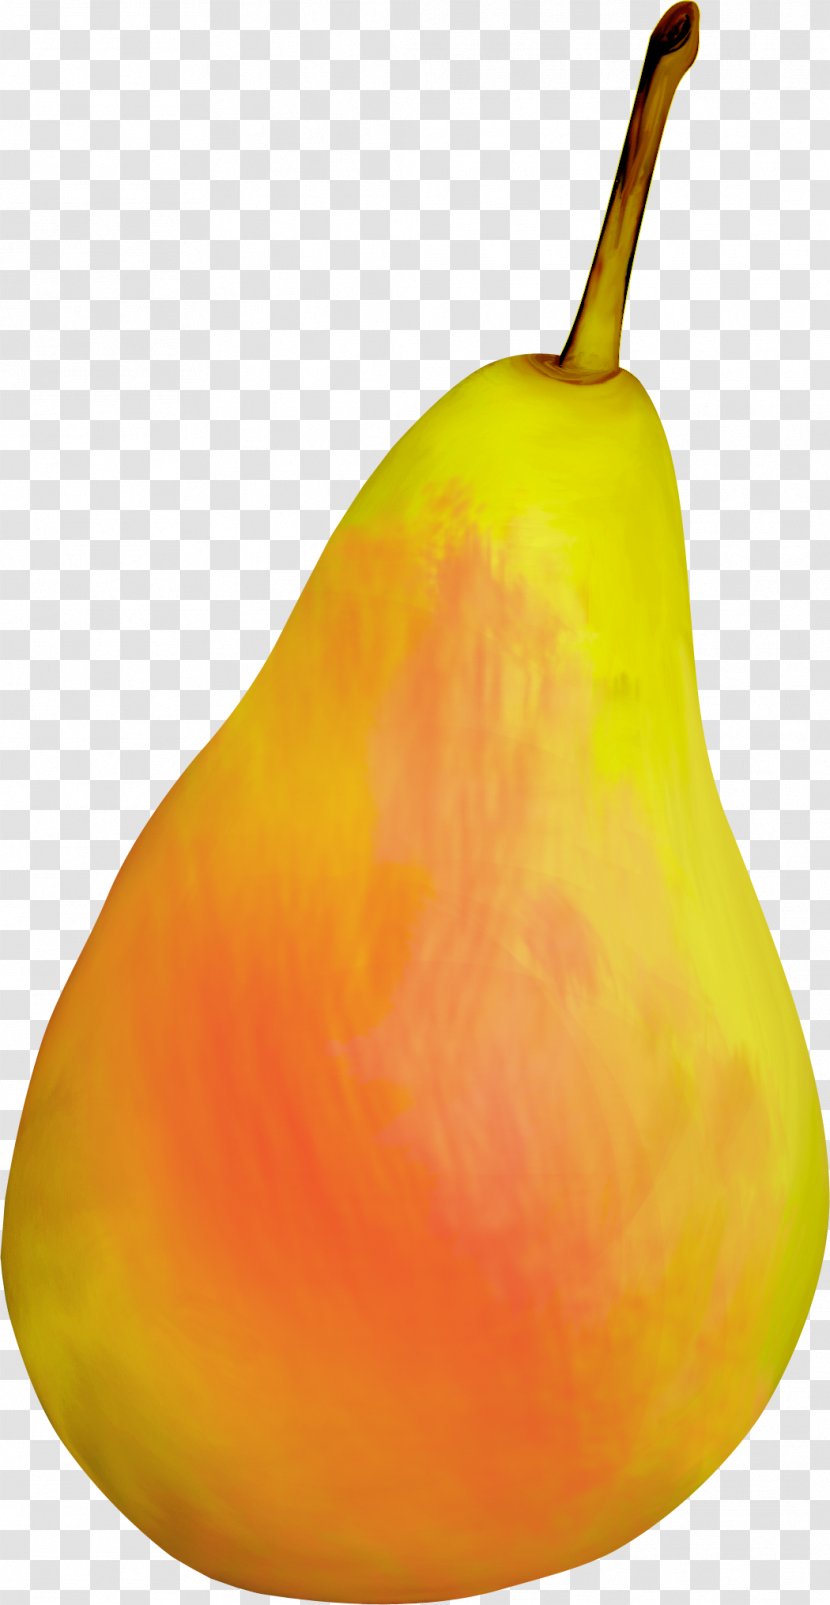 Pear Still Life Photography - Fruit - Orange Pears Transparent PNG